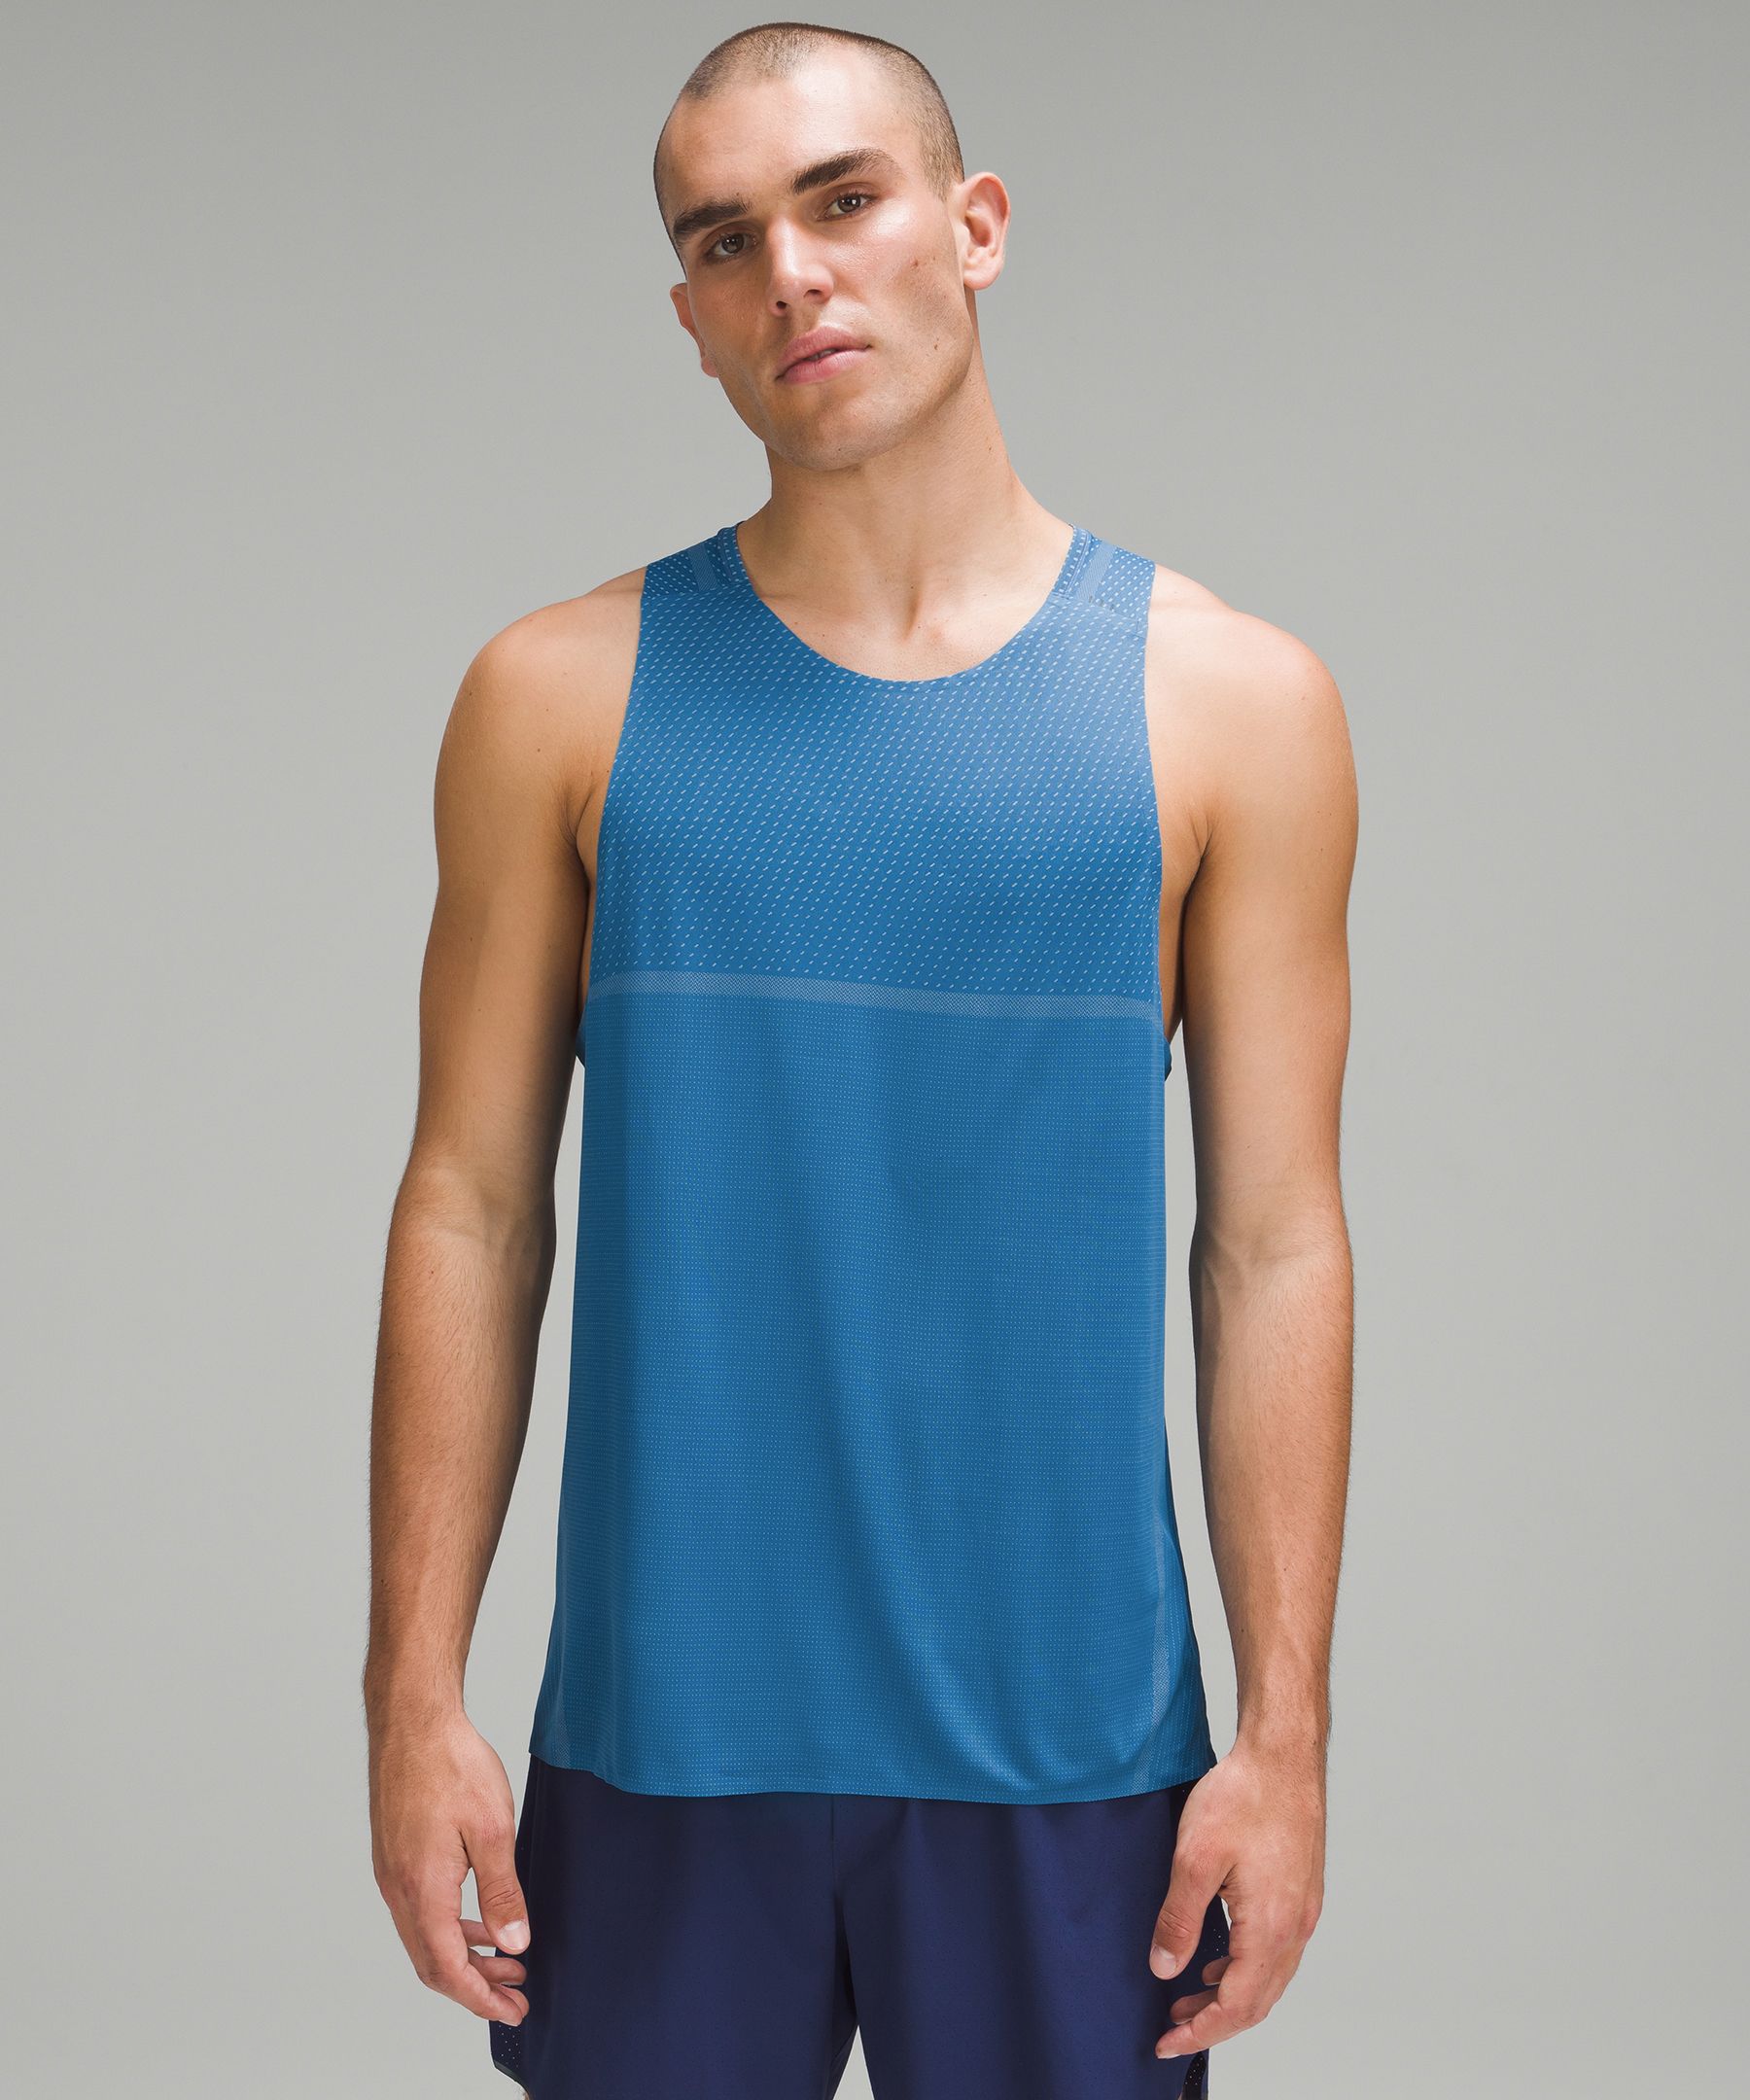 LULULEMON Fast and Free Recycled Breathe Light Mesh Tank Top for Men